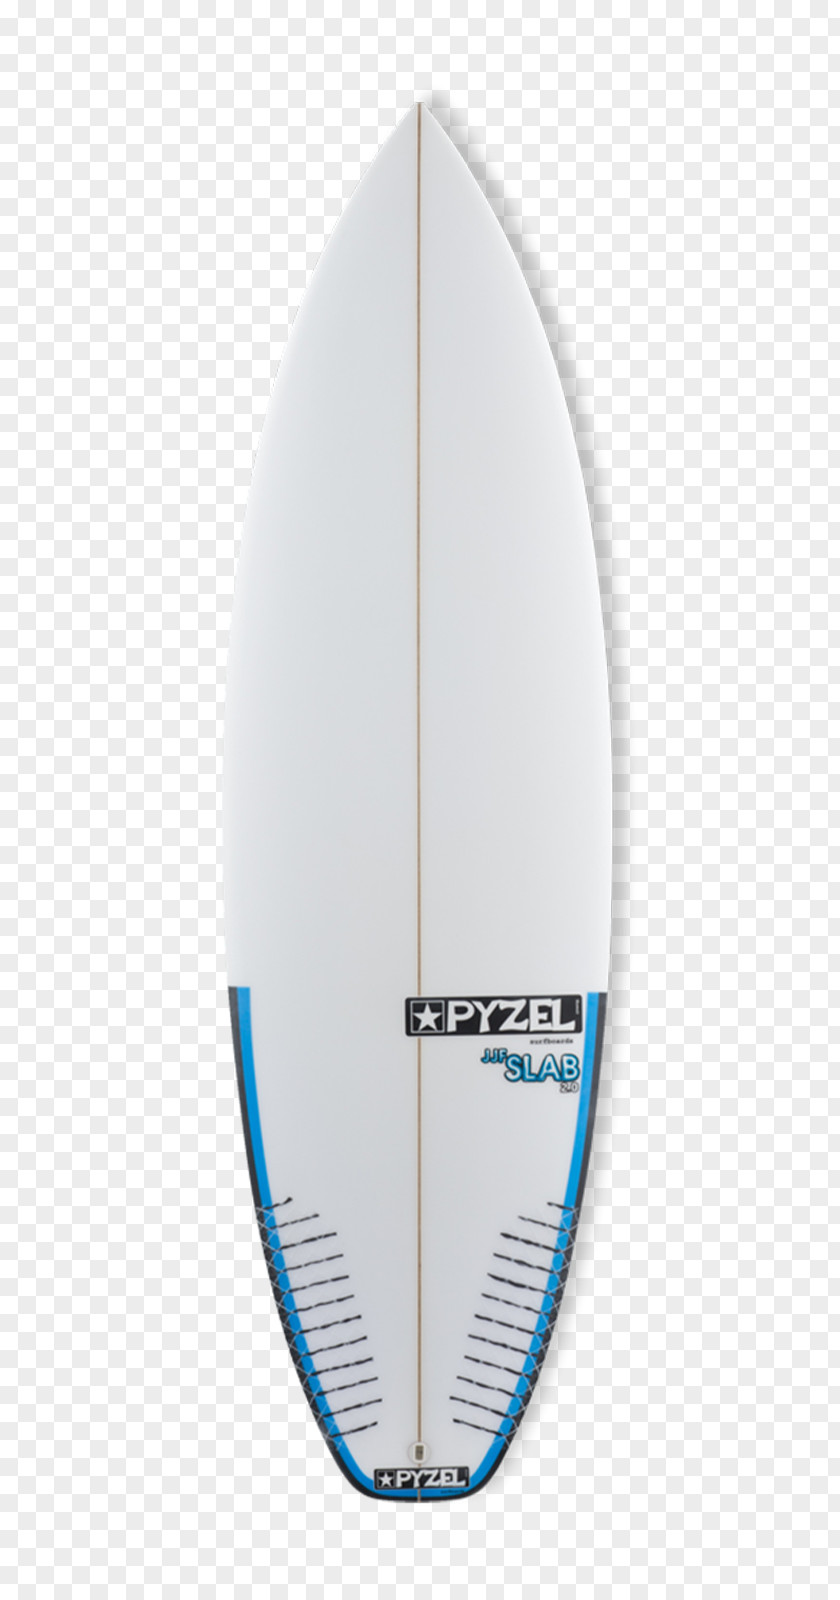 SURFBOARDS Surfboard Product Design United Kingdom Price PNG